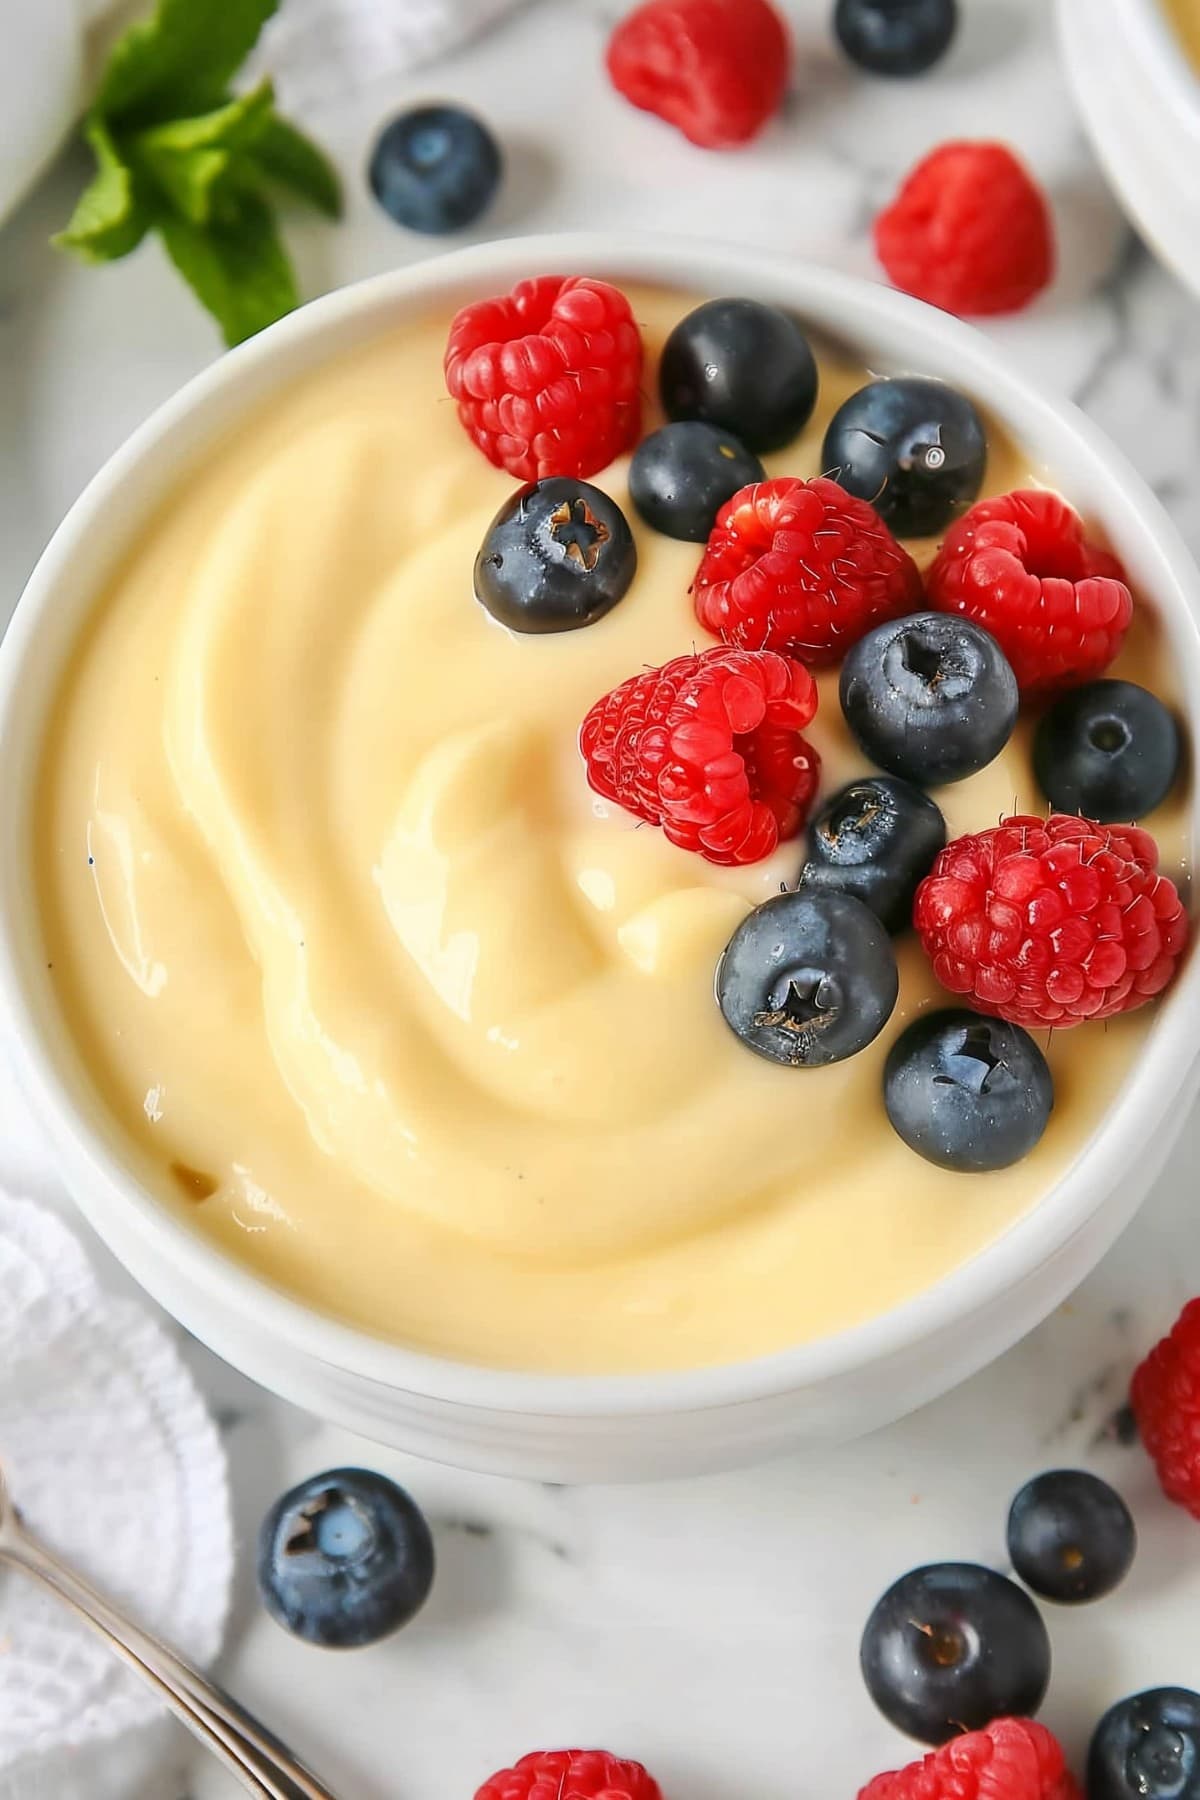 A delectable serving of vanilla custard, beautifully presented with fresh blueberries and raspberries in a white bowl